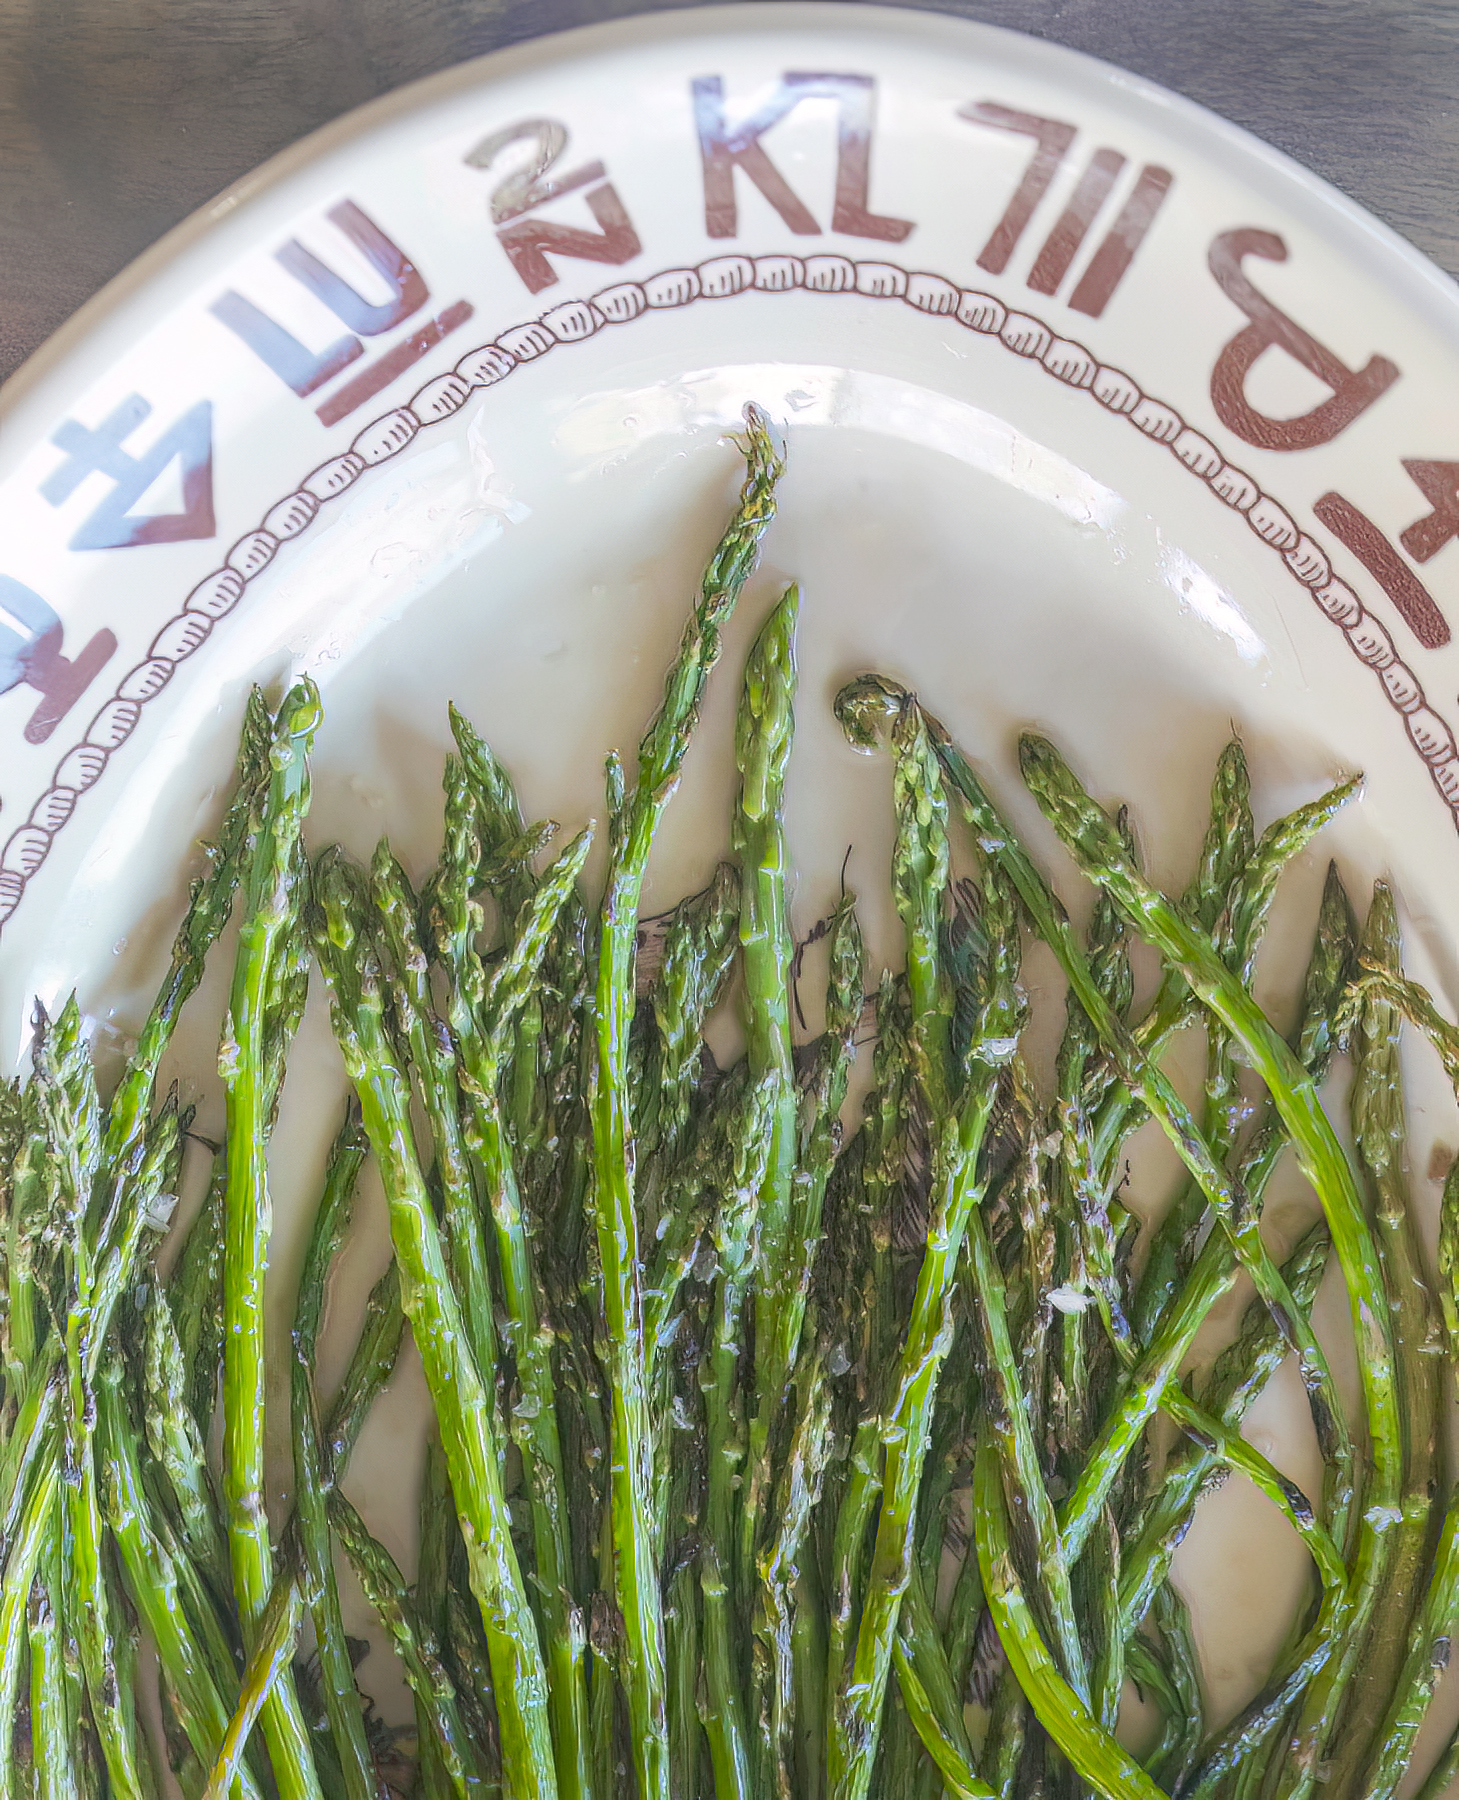 Dry-fried asparagus is charred and crispy on the outside, and tender on the inside. Photography and recipe by Jackie Alpers using Westward Ho plates from the Yellowstone TV series